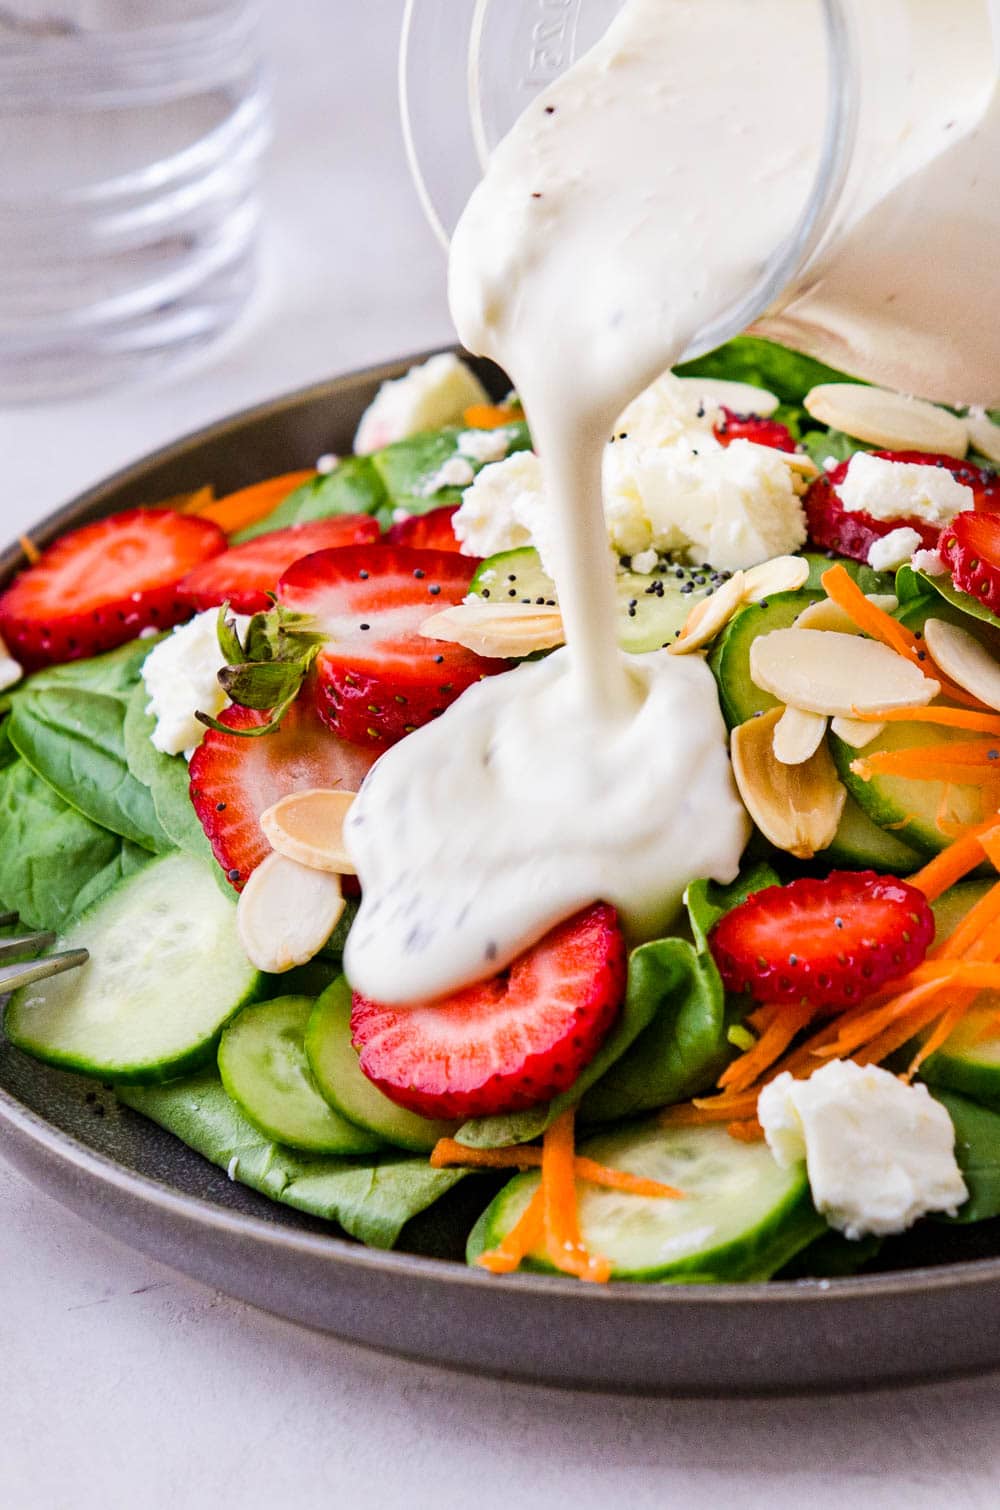 adding the creamy dressing to the spinach and strawberry salad.